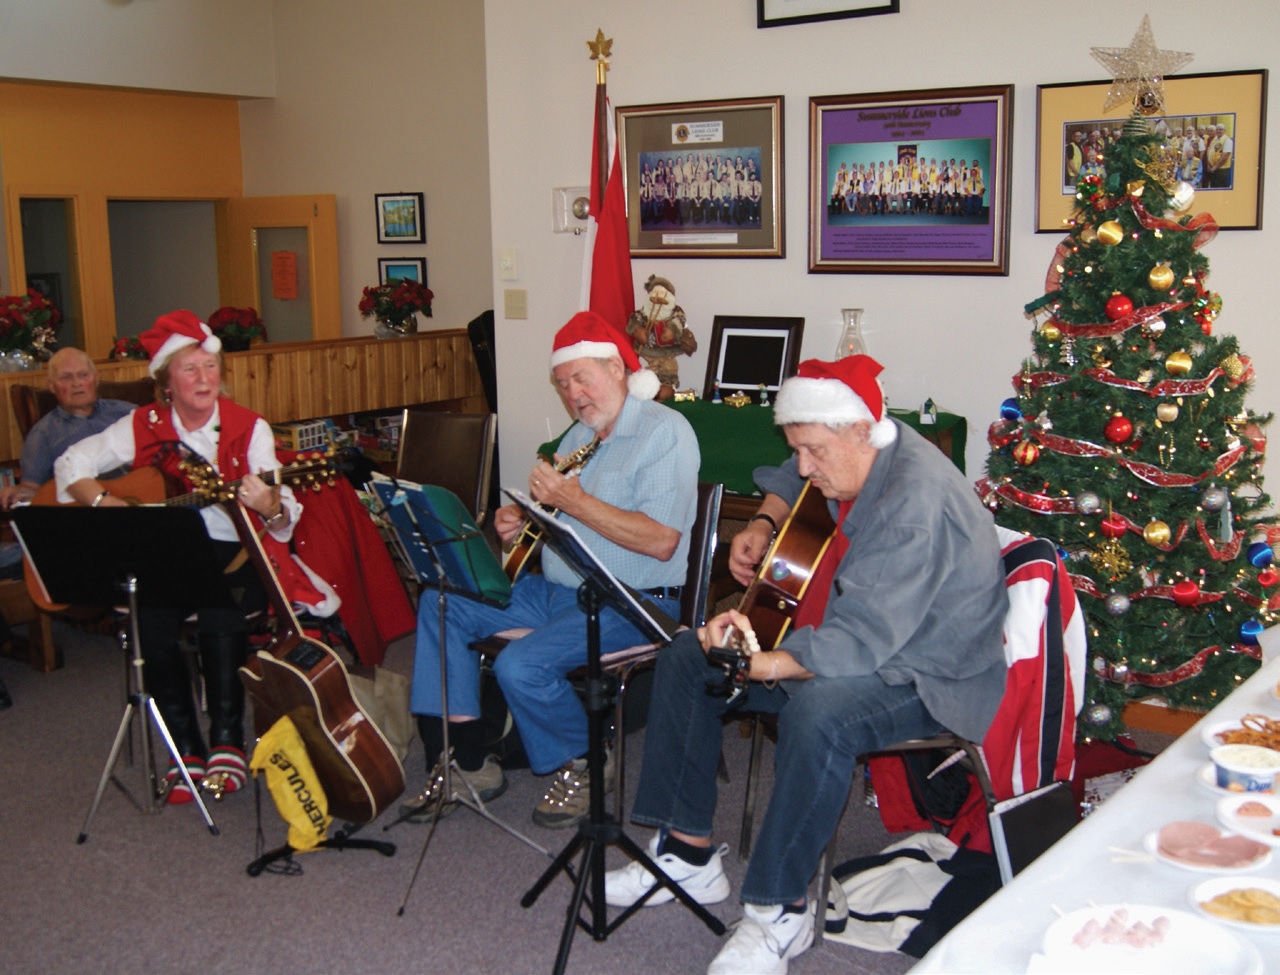 Summerside Lions in Prince Edward Island, Canada, provide an afternoon of good food and holiday tunes for residents in a senior housing complex.